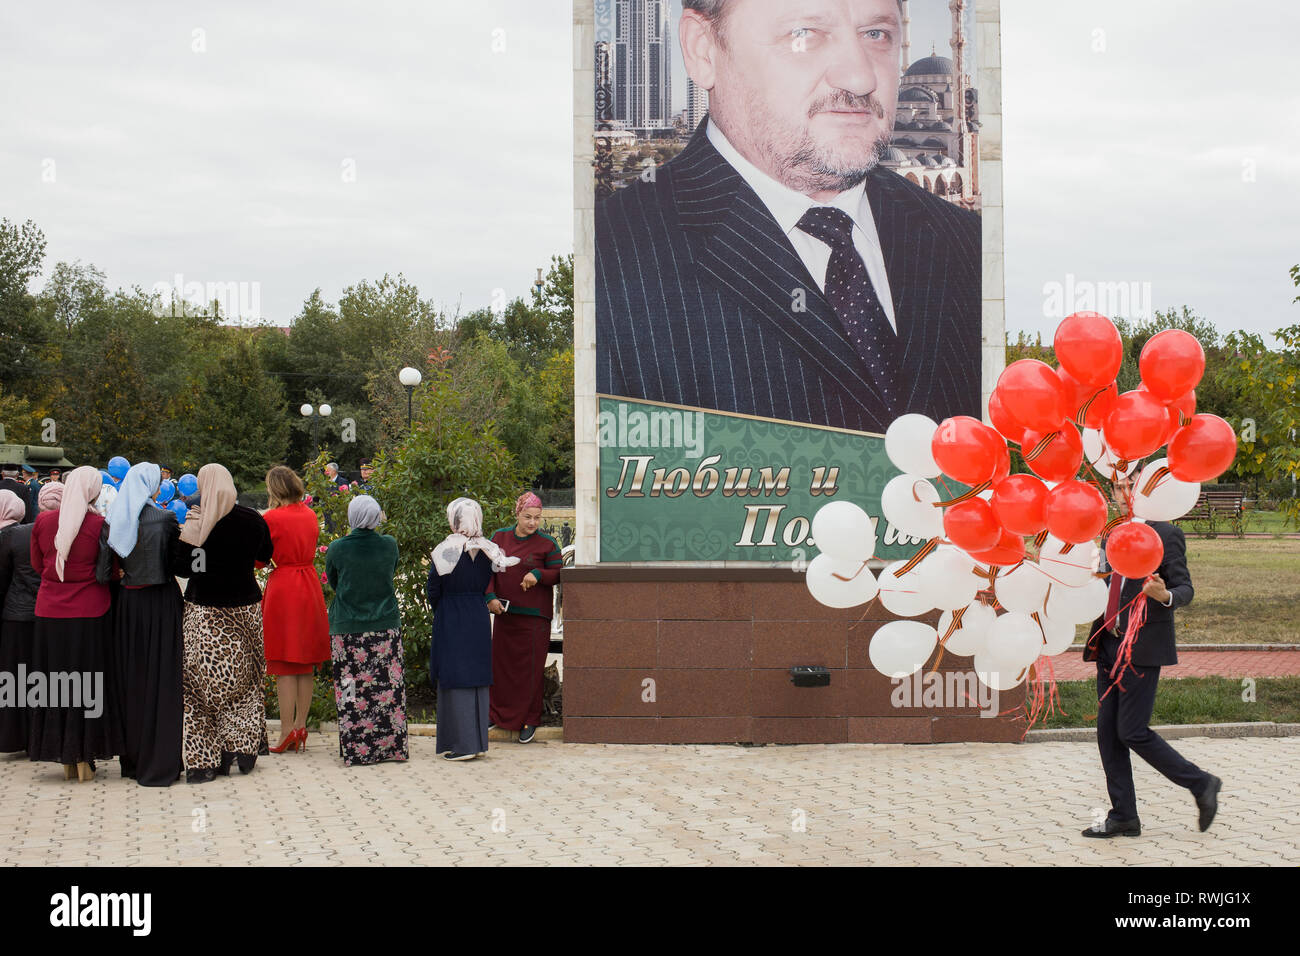 Grosny, Russia. 05th Oct, 2018. Chechens have gathered for a ceremony marking the 200th anniversary of the founding of Grozny. The portrait shows Akhmat Kadyrov (1951-2004), father of Ramzan Kadyrov and founder figure of the new Chechnya. (to dpa story 'Kadyrov's dictatorship turns Chechnya into a time bomb') Credit: Emile Ducke/A4897/Emile Ducke/dpa/Alamy Live News Stock Photo